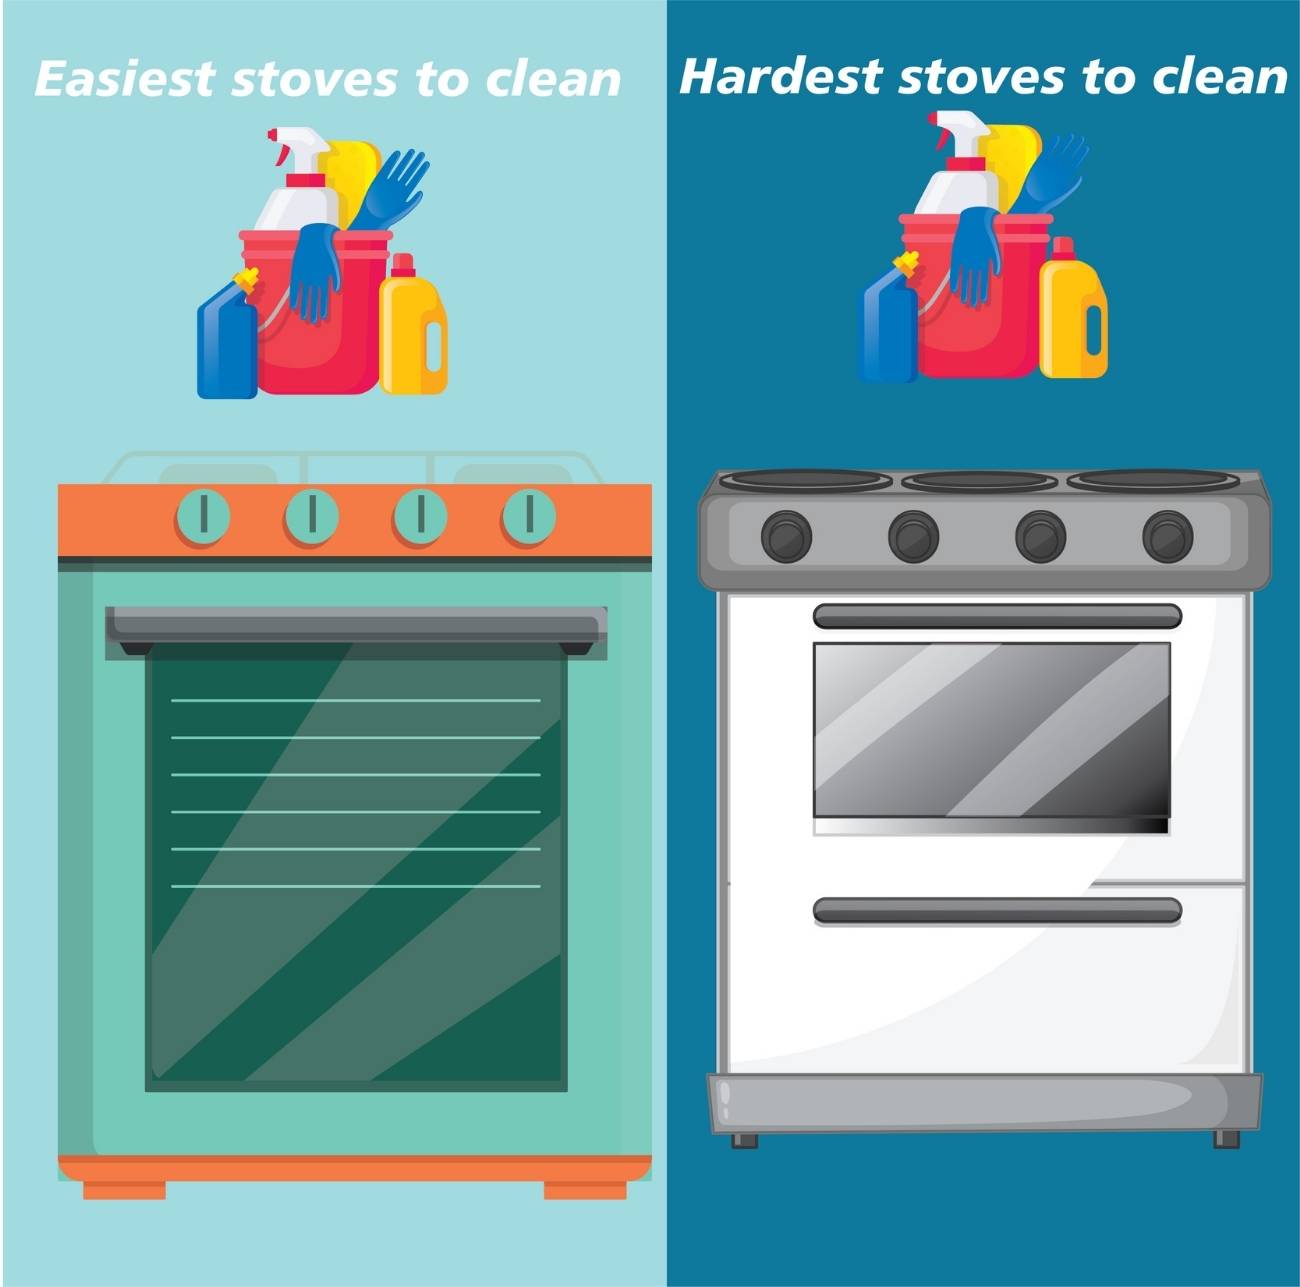 Electric stoves can be cleaned easily than gas stoves